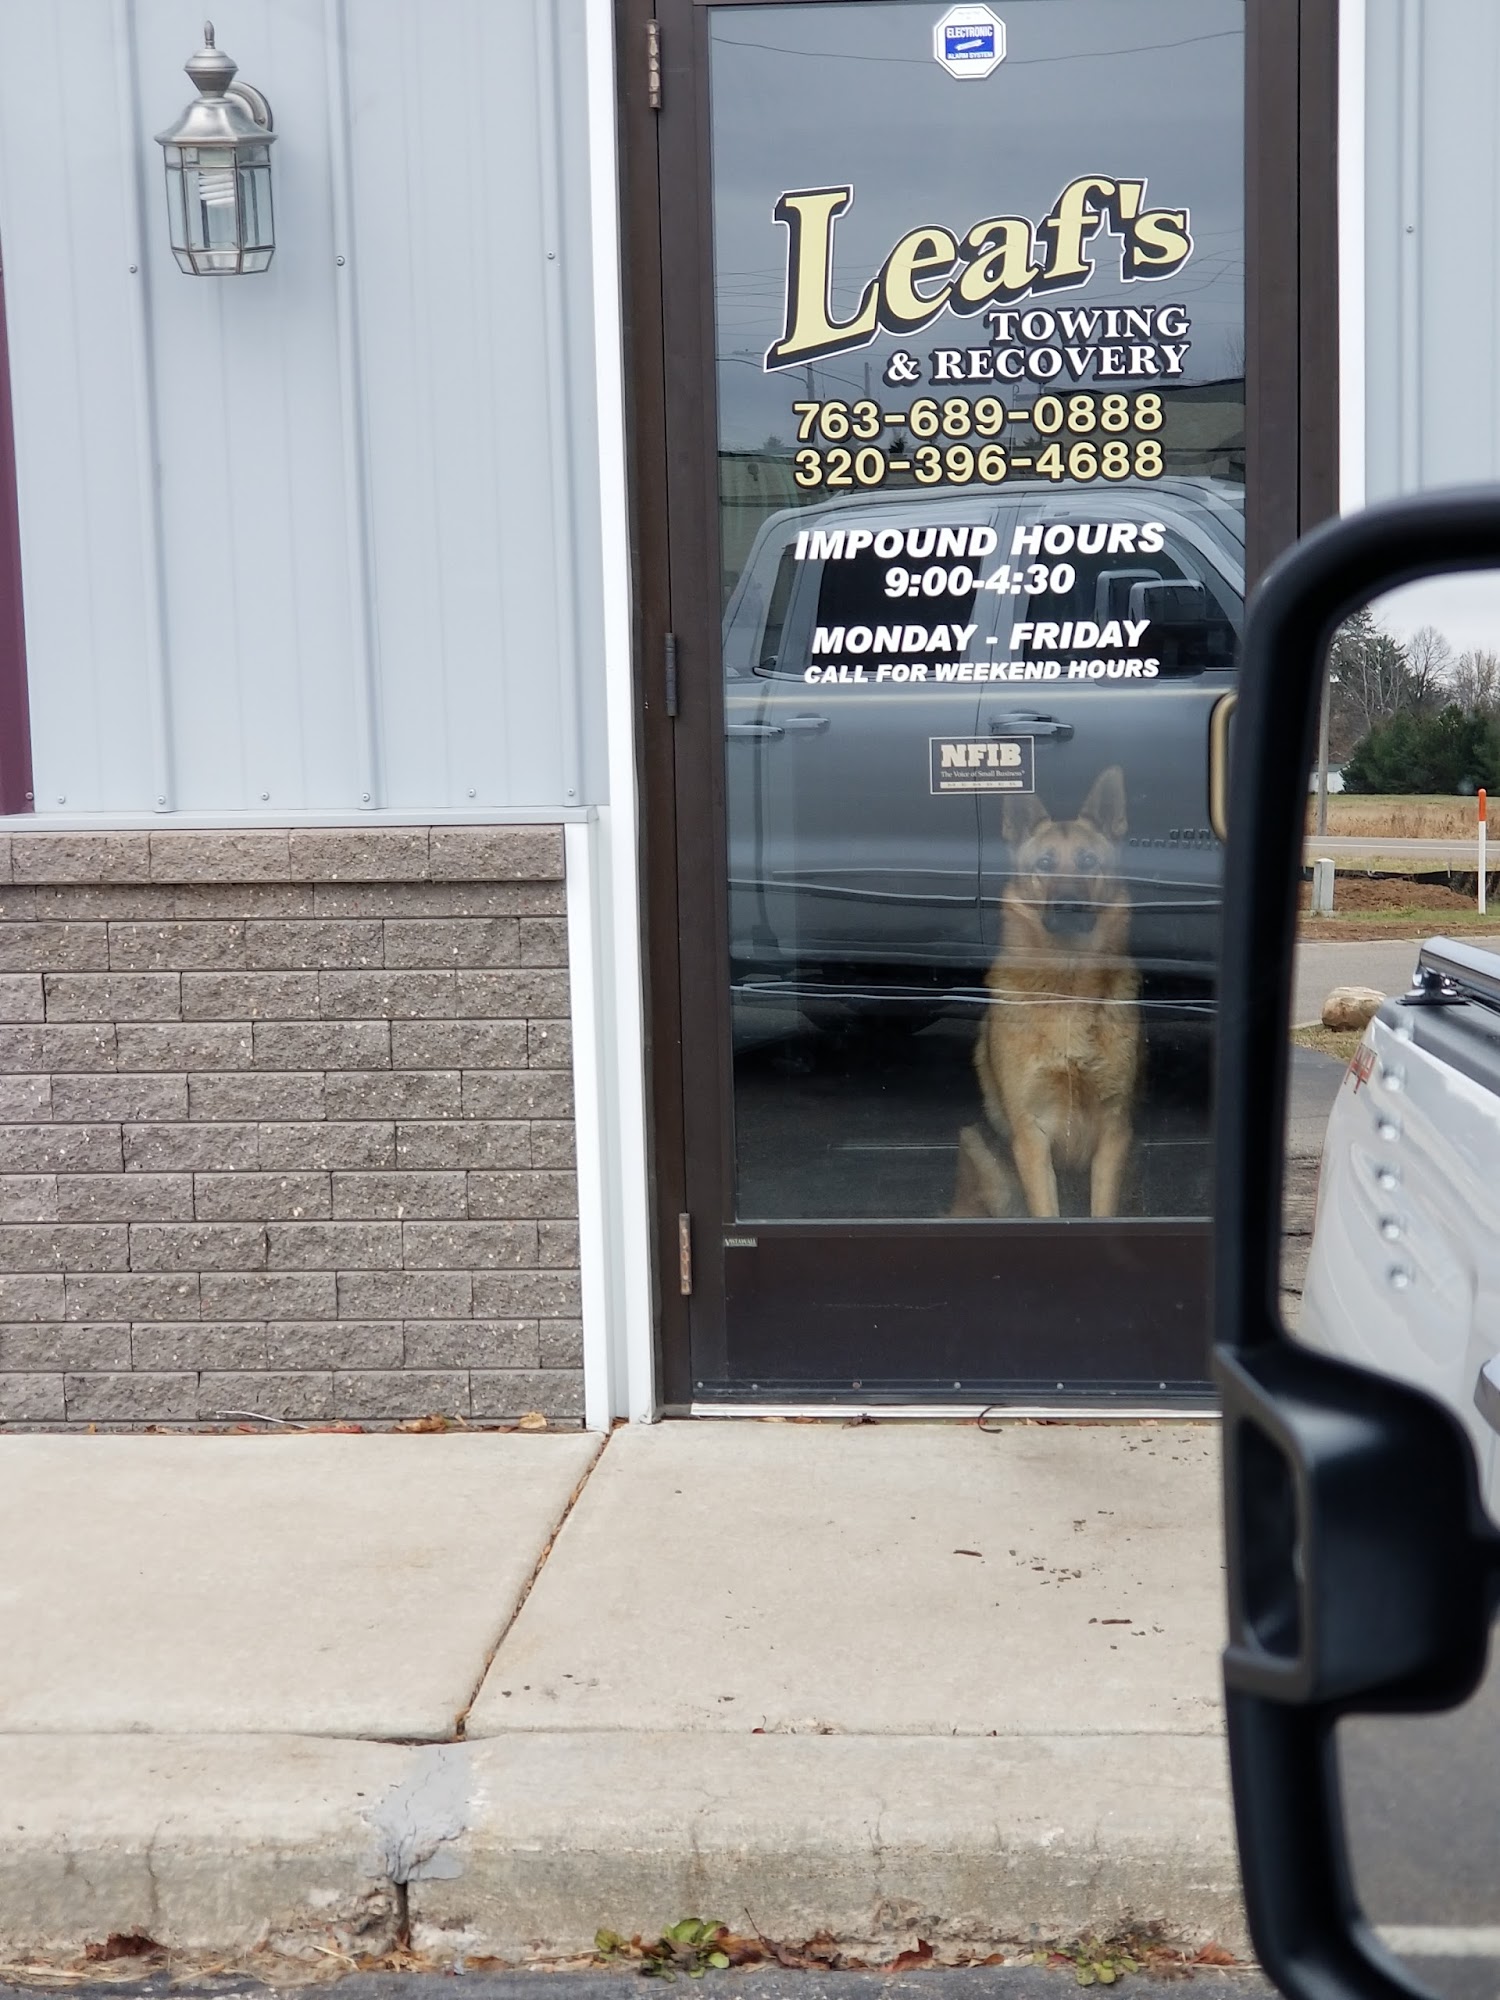 Leaf's Towing & Recovery